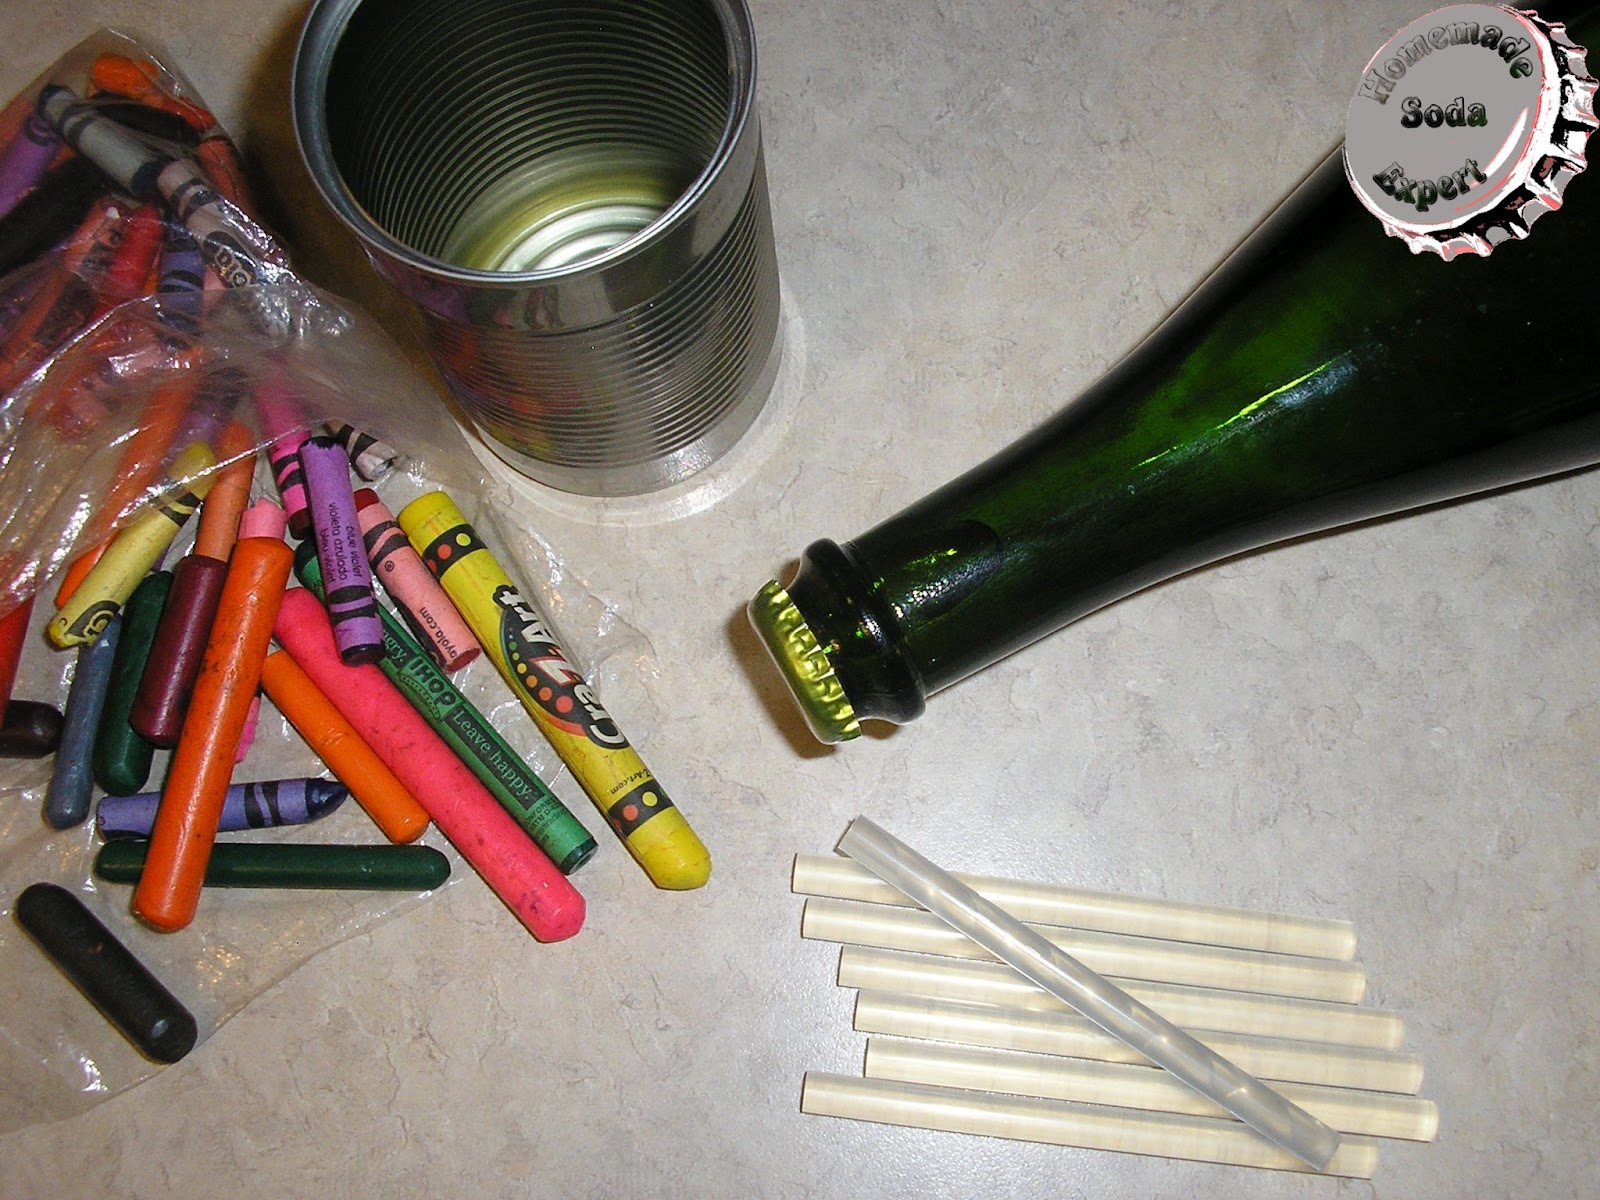 How To Use Bottle Sealing Wax - Wine Making and Beer Brewing Blog